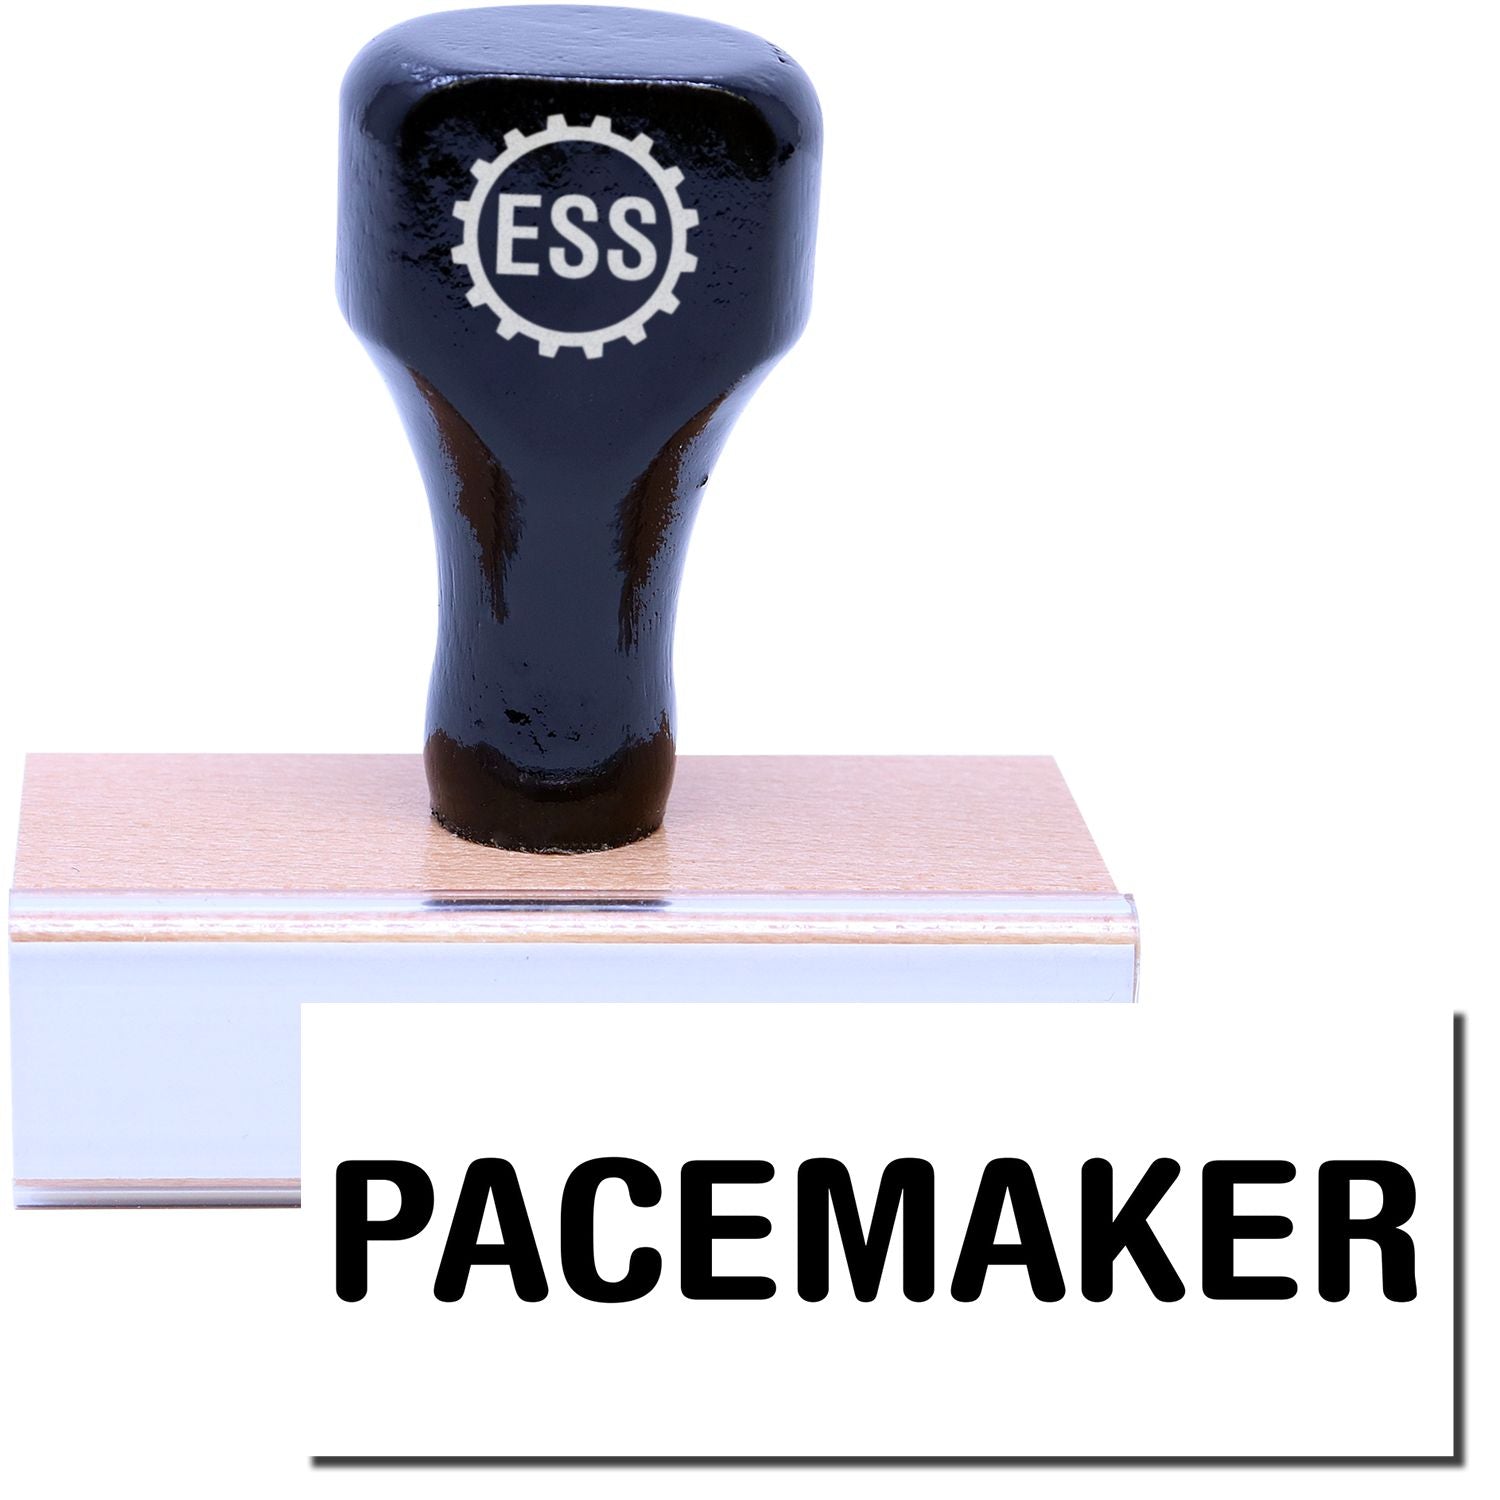 A stock office rubber stamp with a stamped image showing how the text "PACEMAKER" is displayed after stamping.